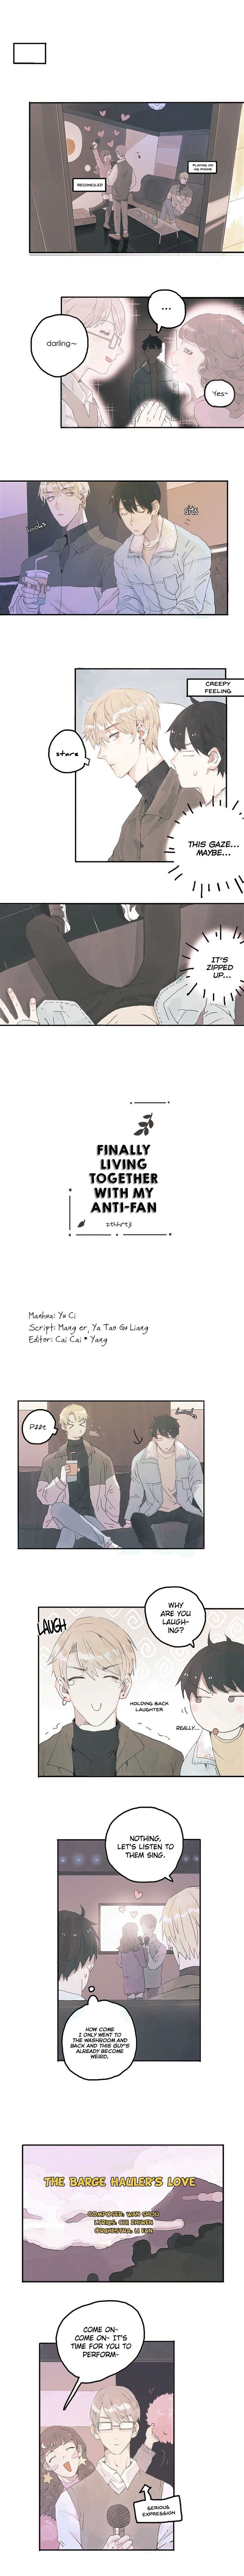 Finally Living Together With my Anti-Fan Chapter 13 page 1